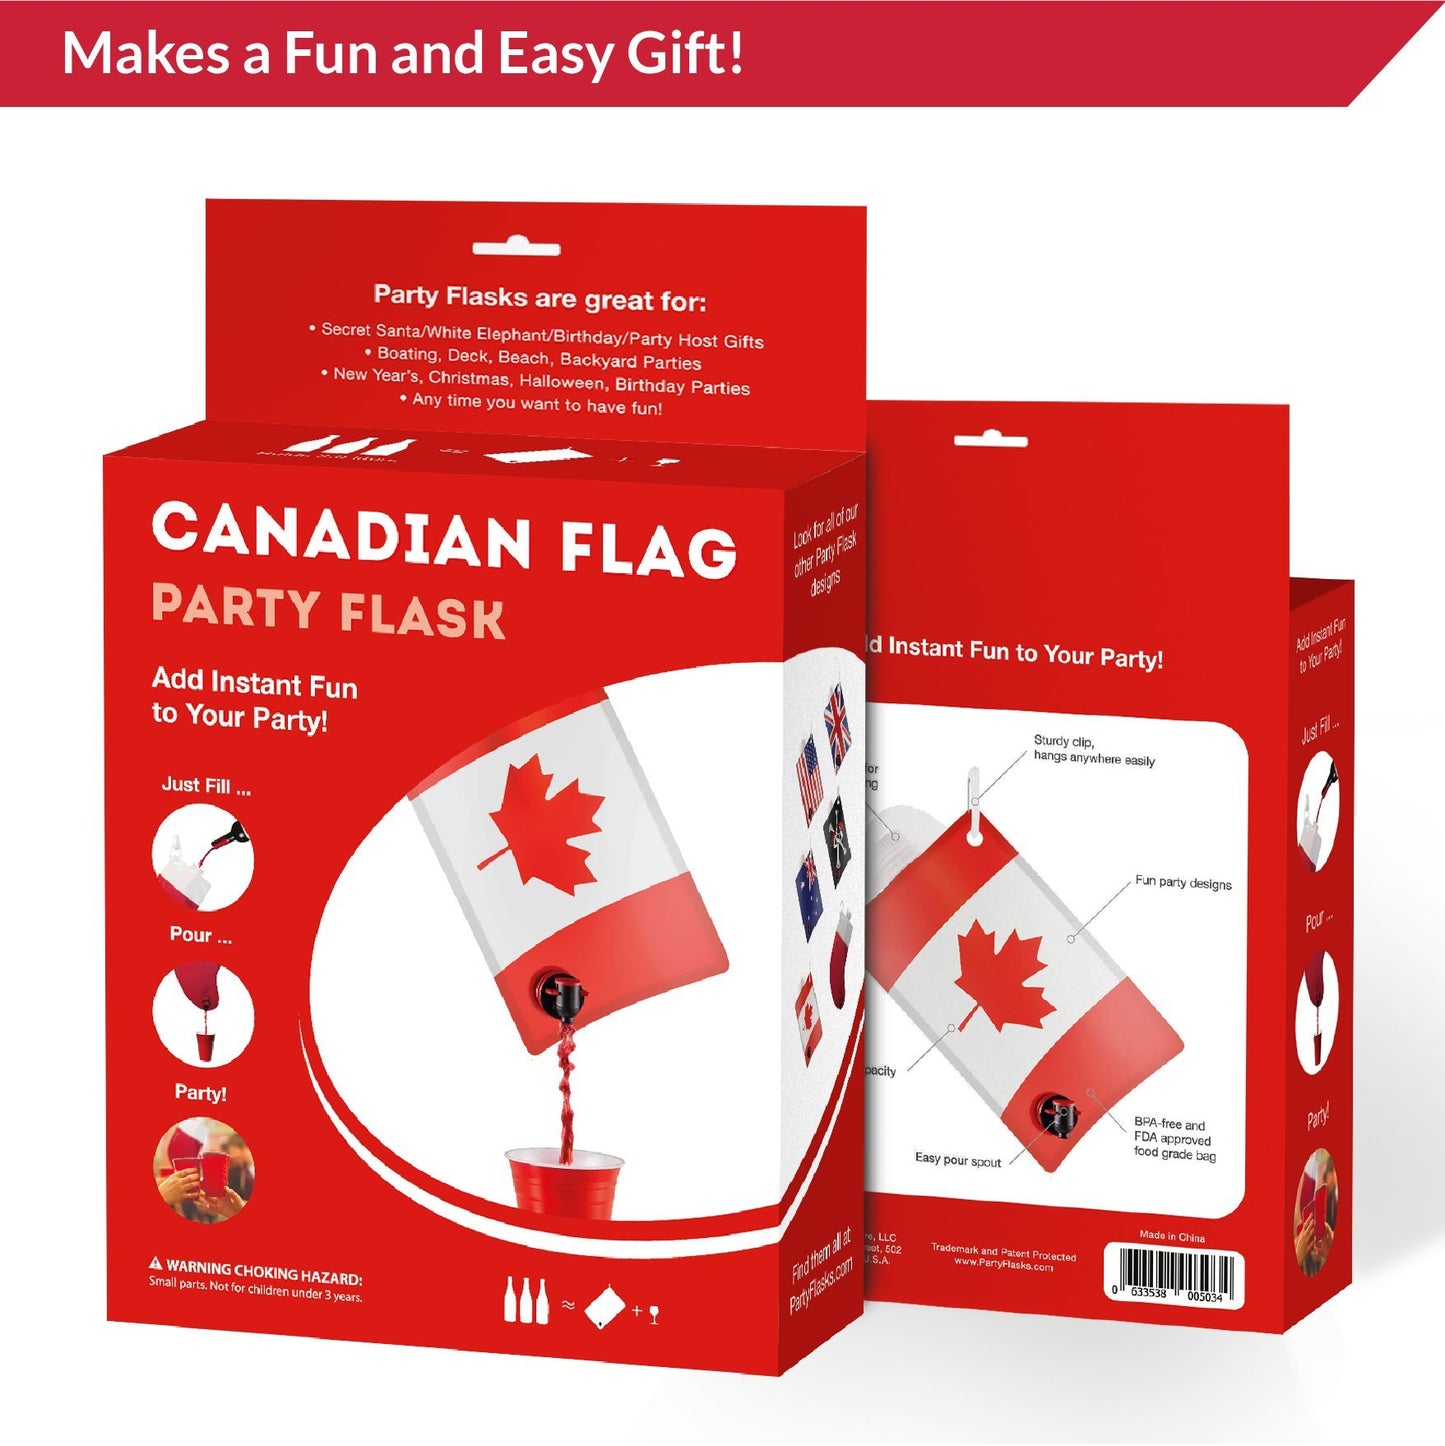 Canadian Flag Adult Party Flask: 2 liter Flasks Make the Perfect Drink Dispenser for Your Canada Day Party Supplies, Summer Beach or Pool Party,Hockey, Soccer,or Baseball Parties,Funny Gifts, and More